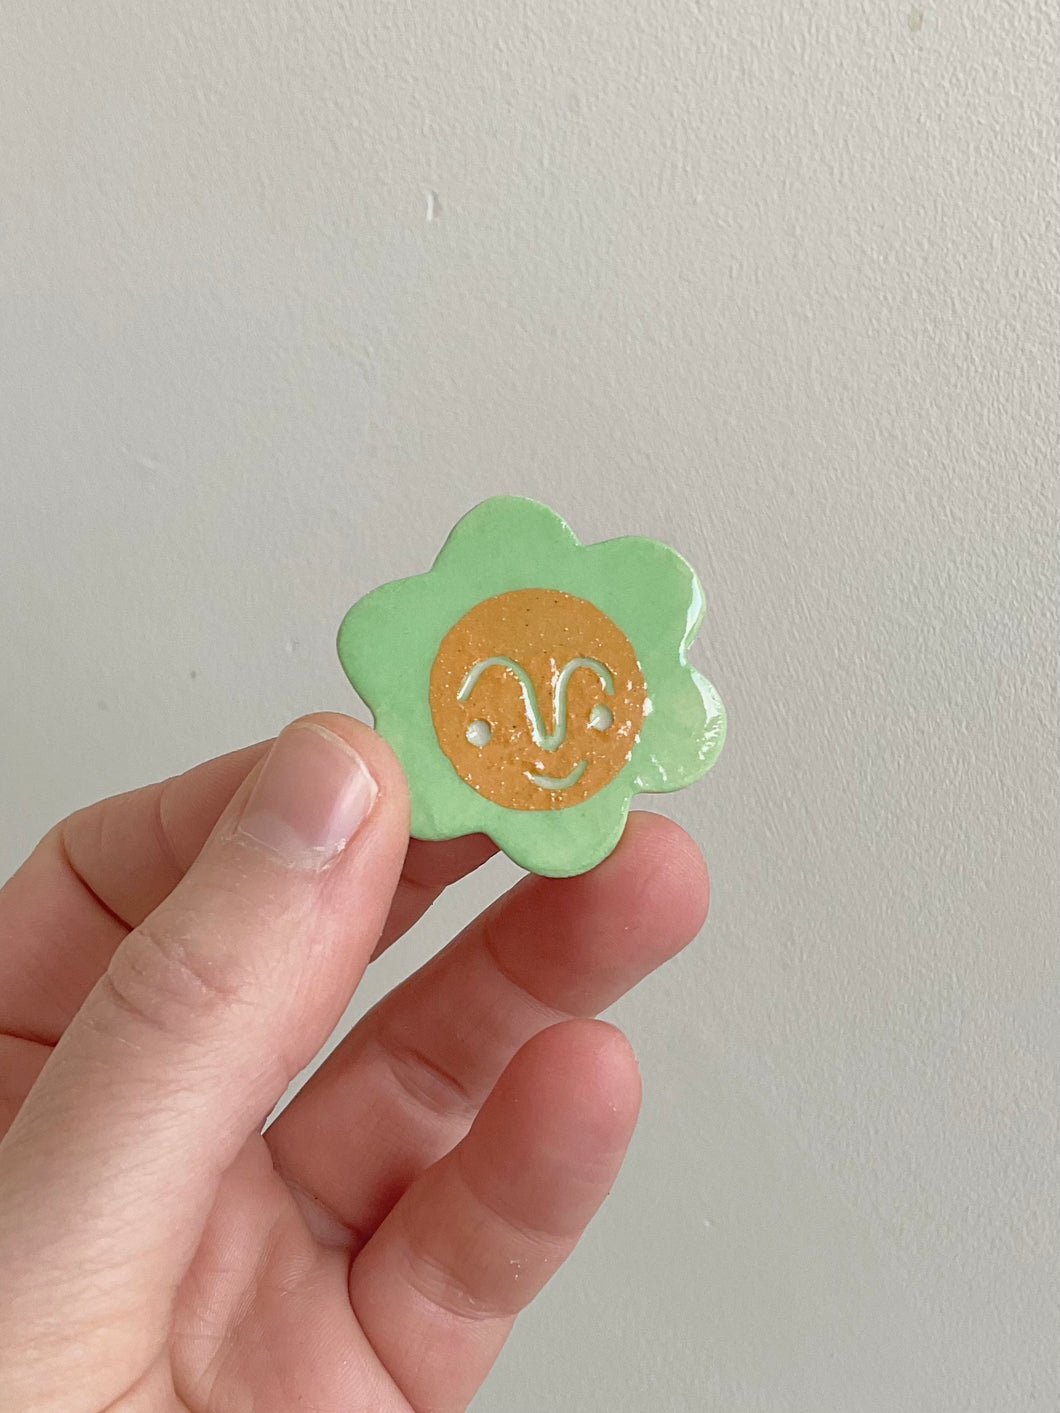 Send a Smile - Green and Yellow flower magnet